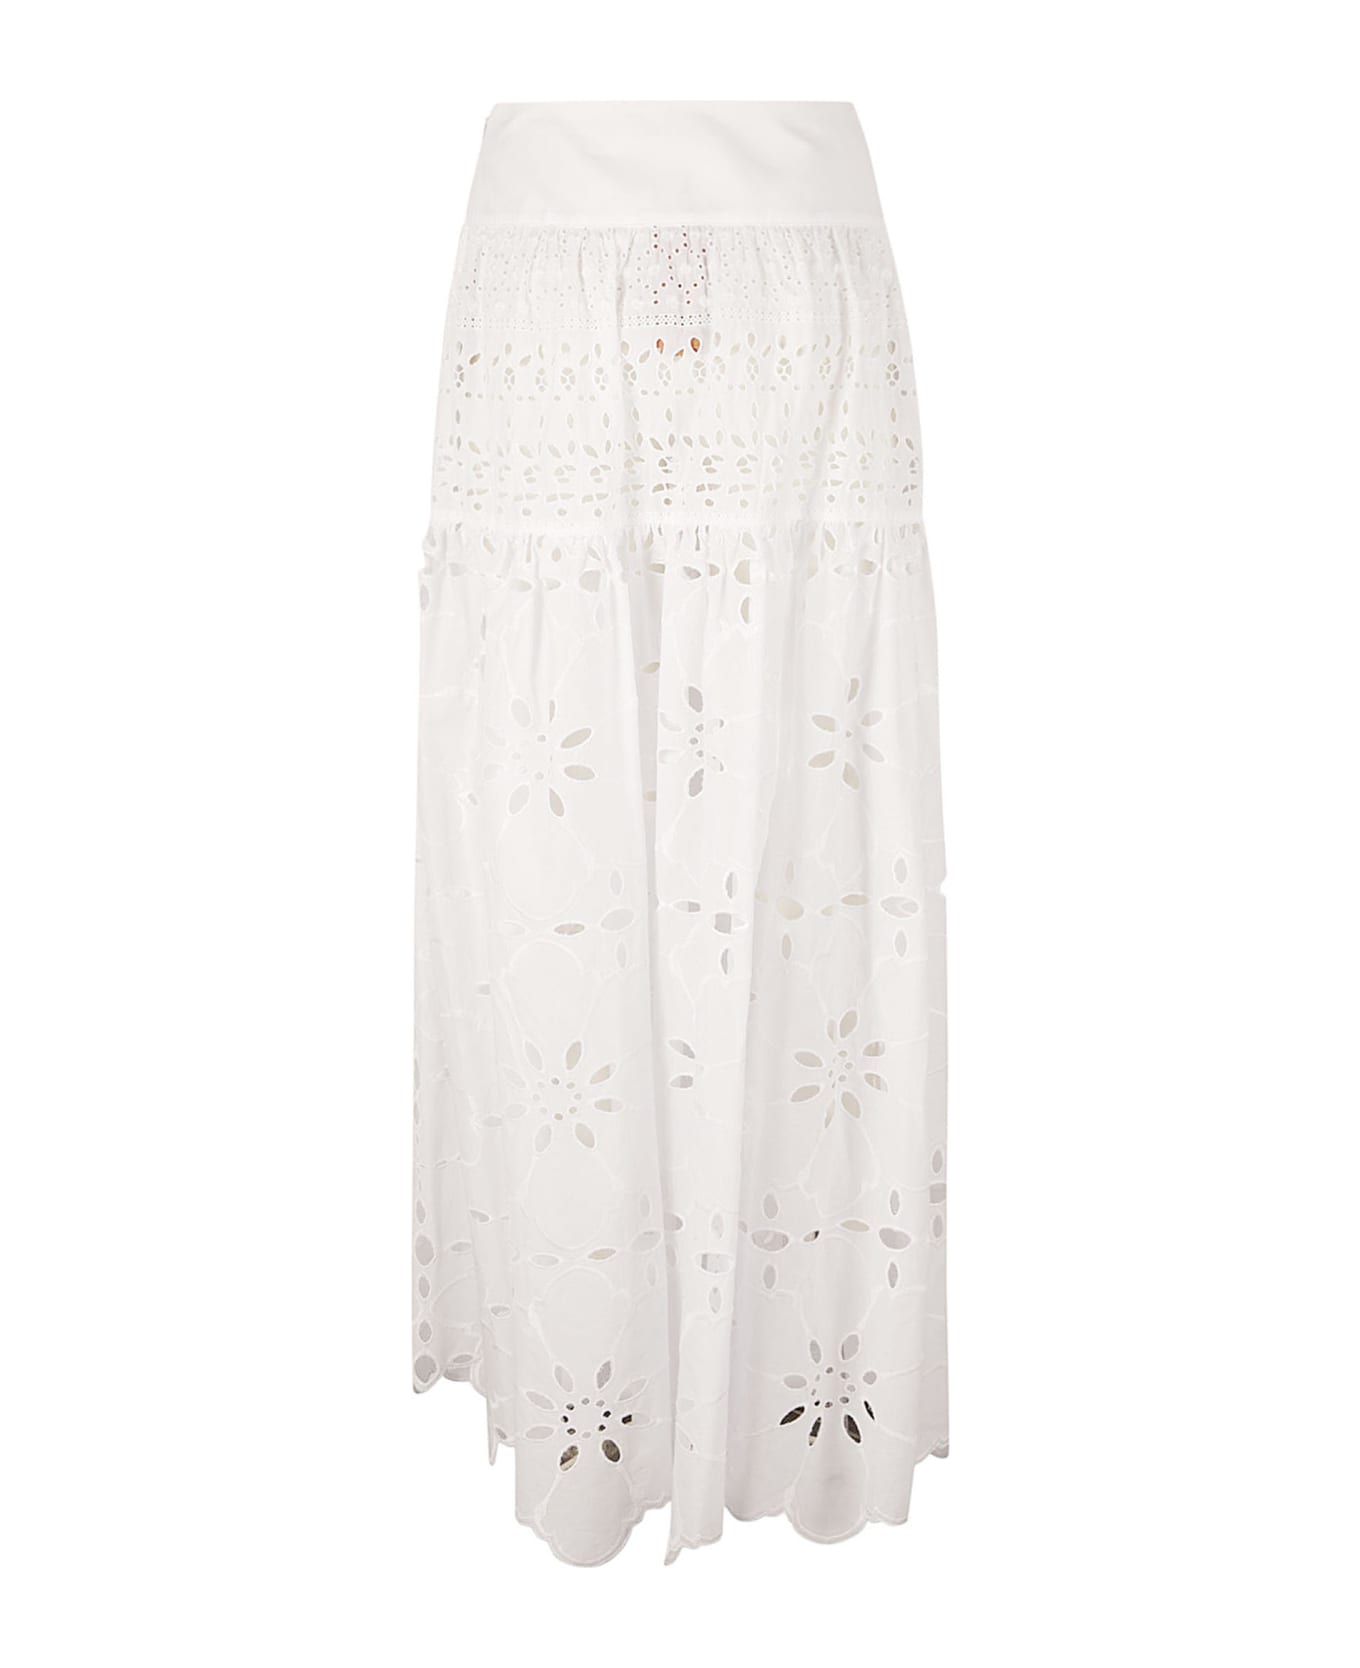 Ermanno Scervino High-waist Floral Perforated Skirt - Bright White